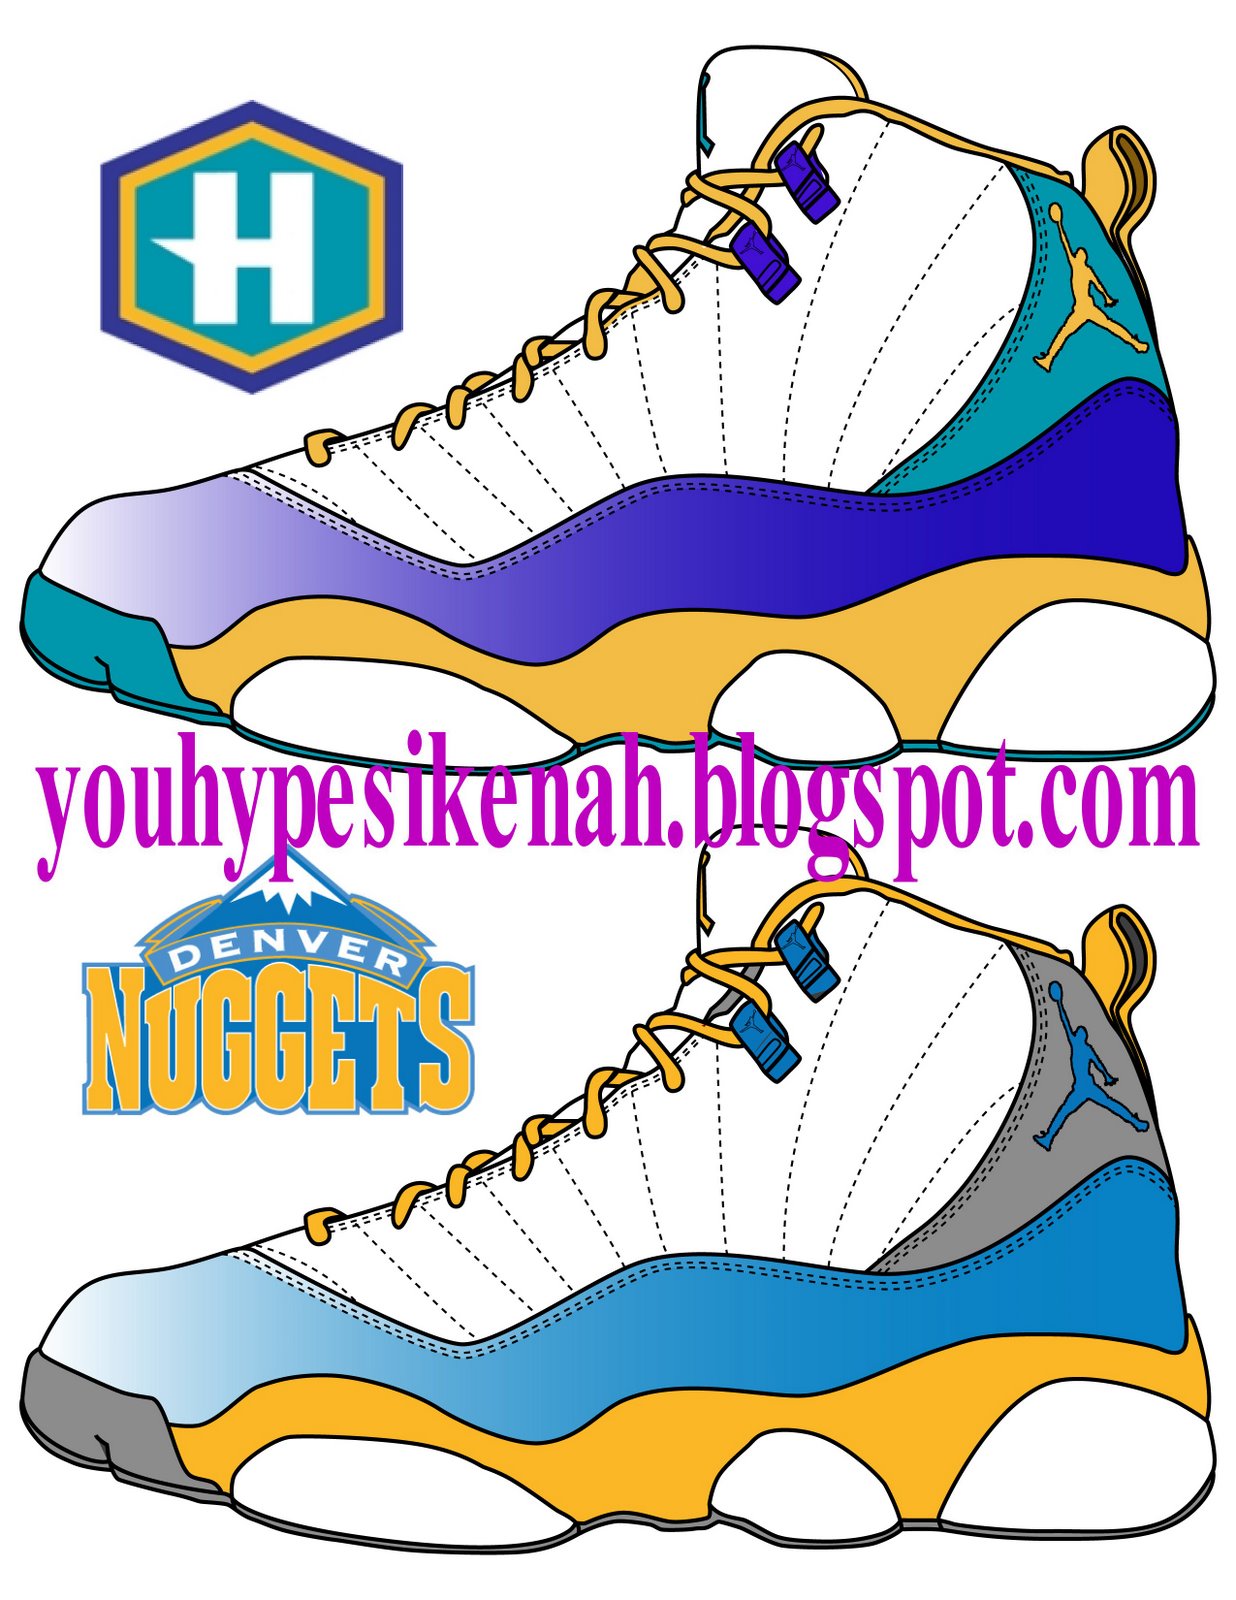 [Hornets+and+Nuggets+Vol.+2.jpg]